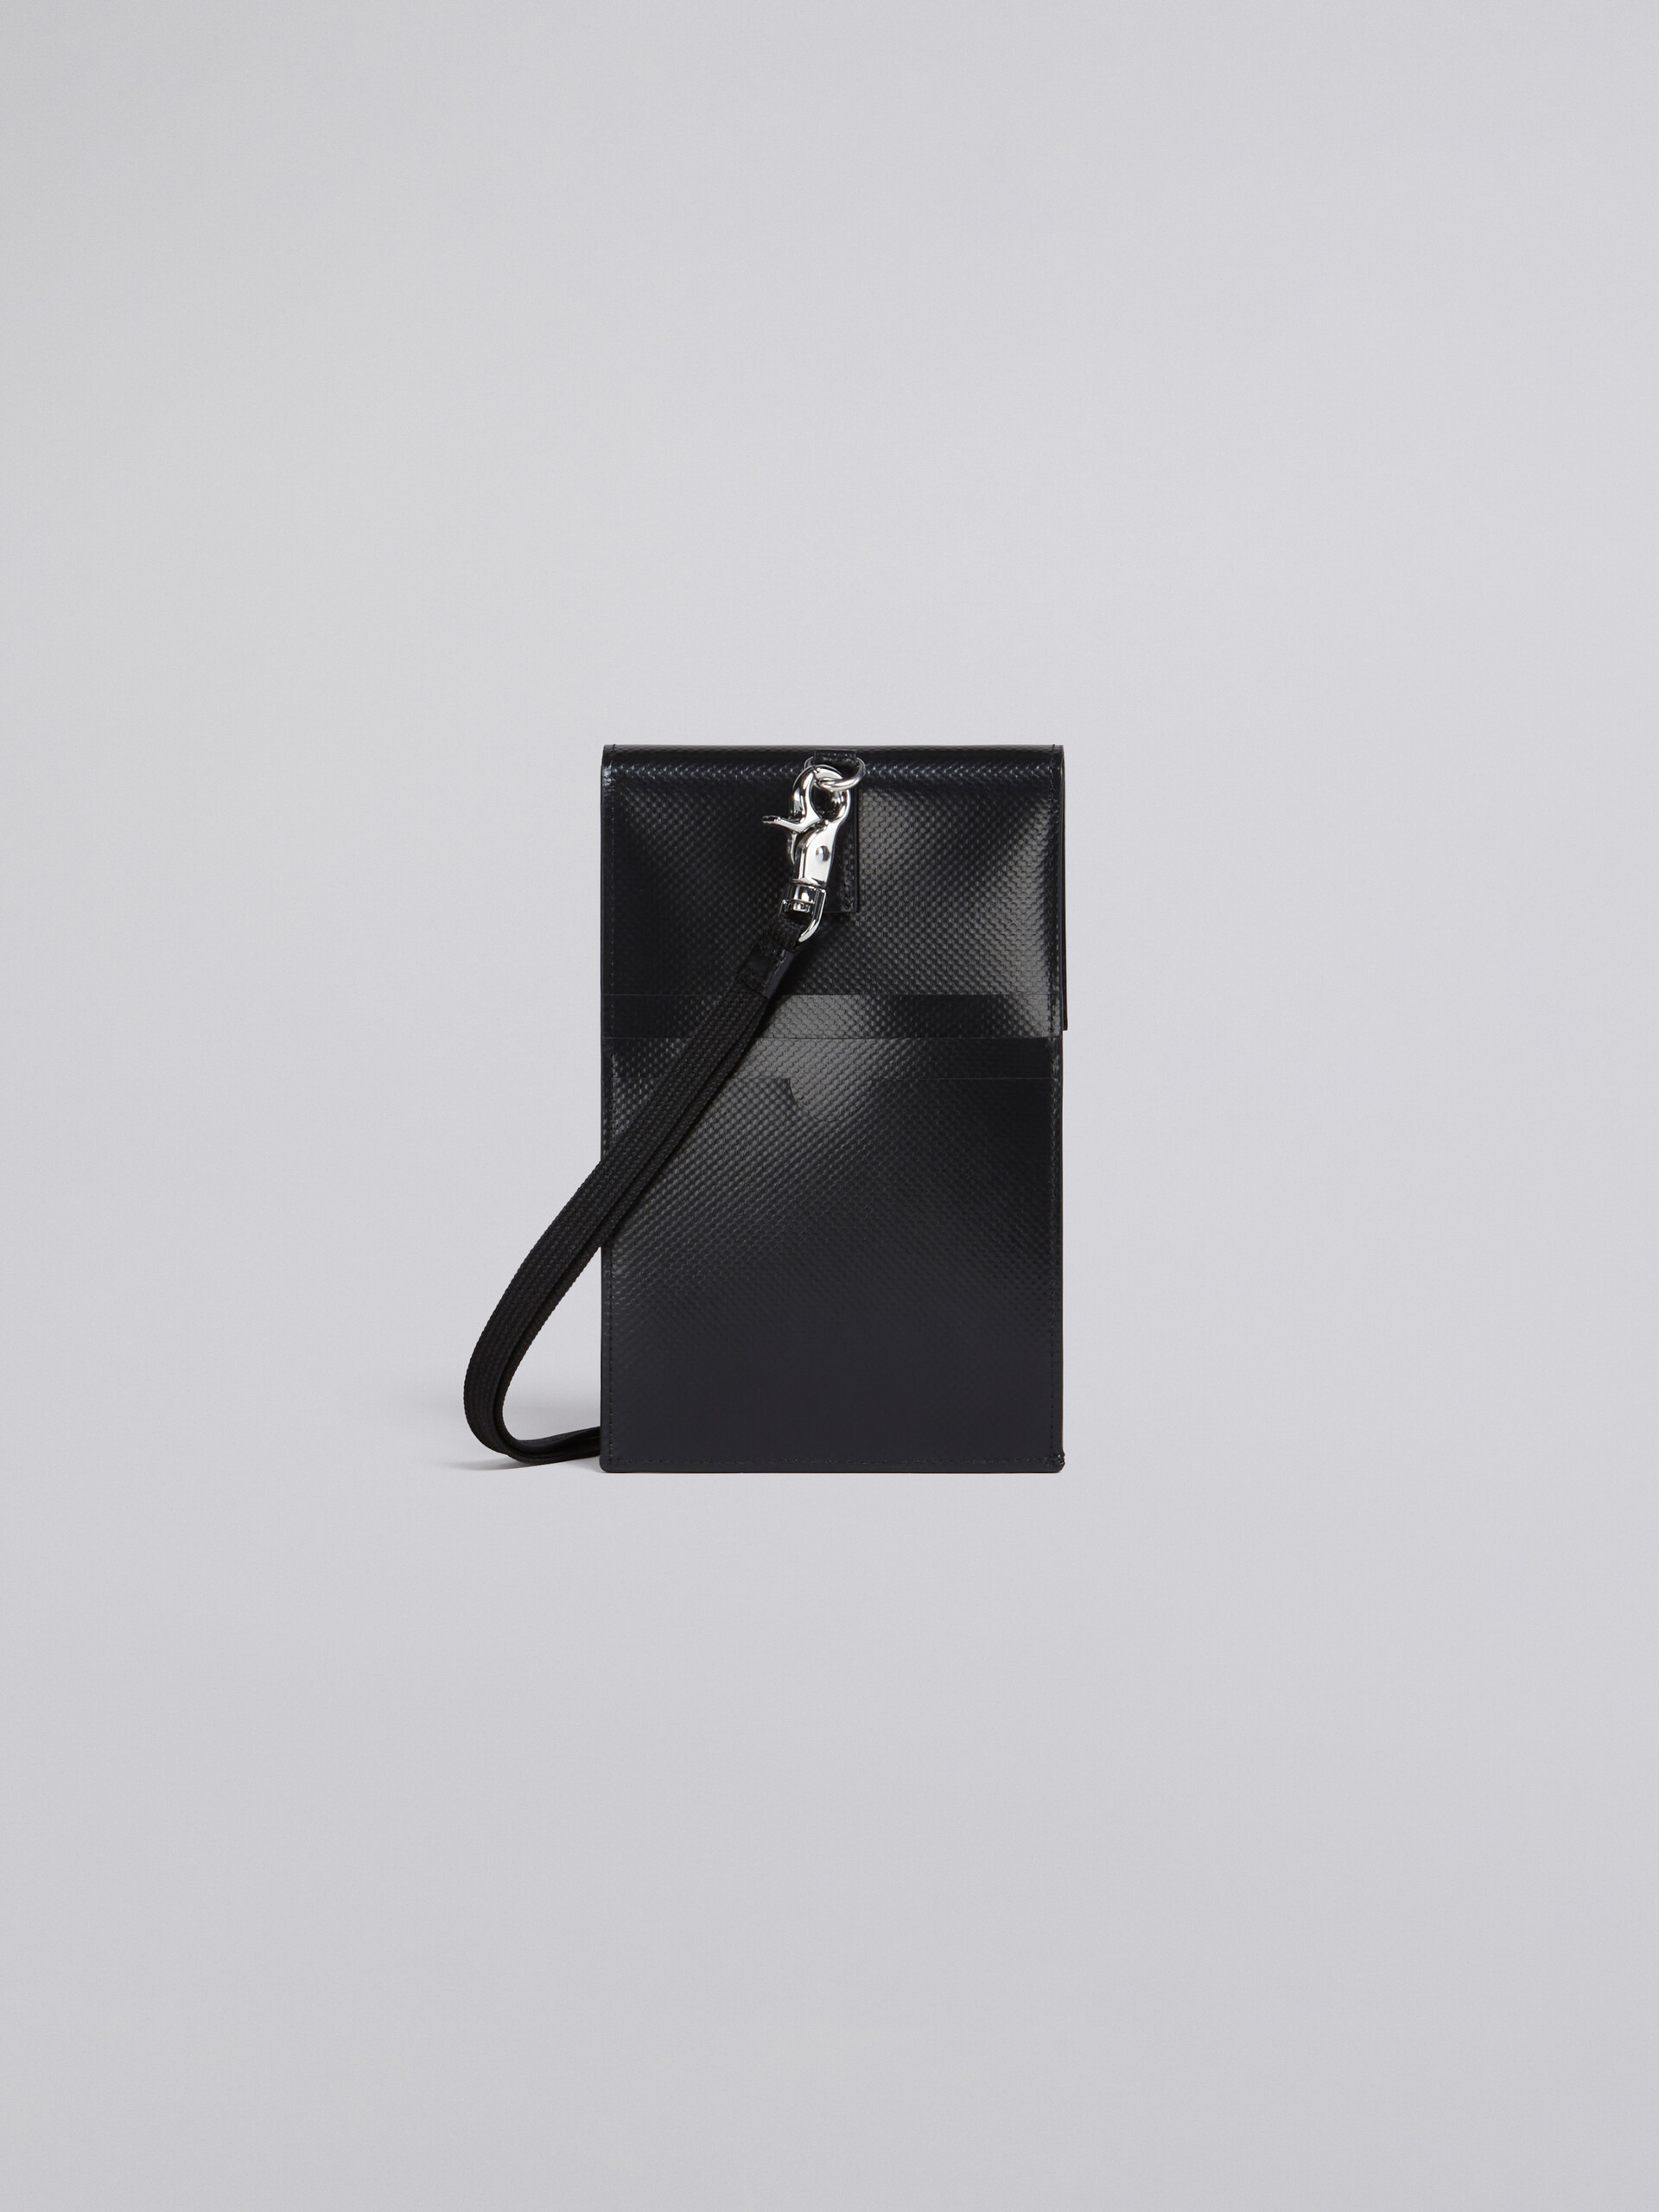 Euphoria print phone case - Wallets and Small Leather Goods - Image 3